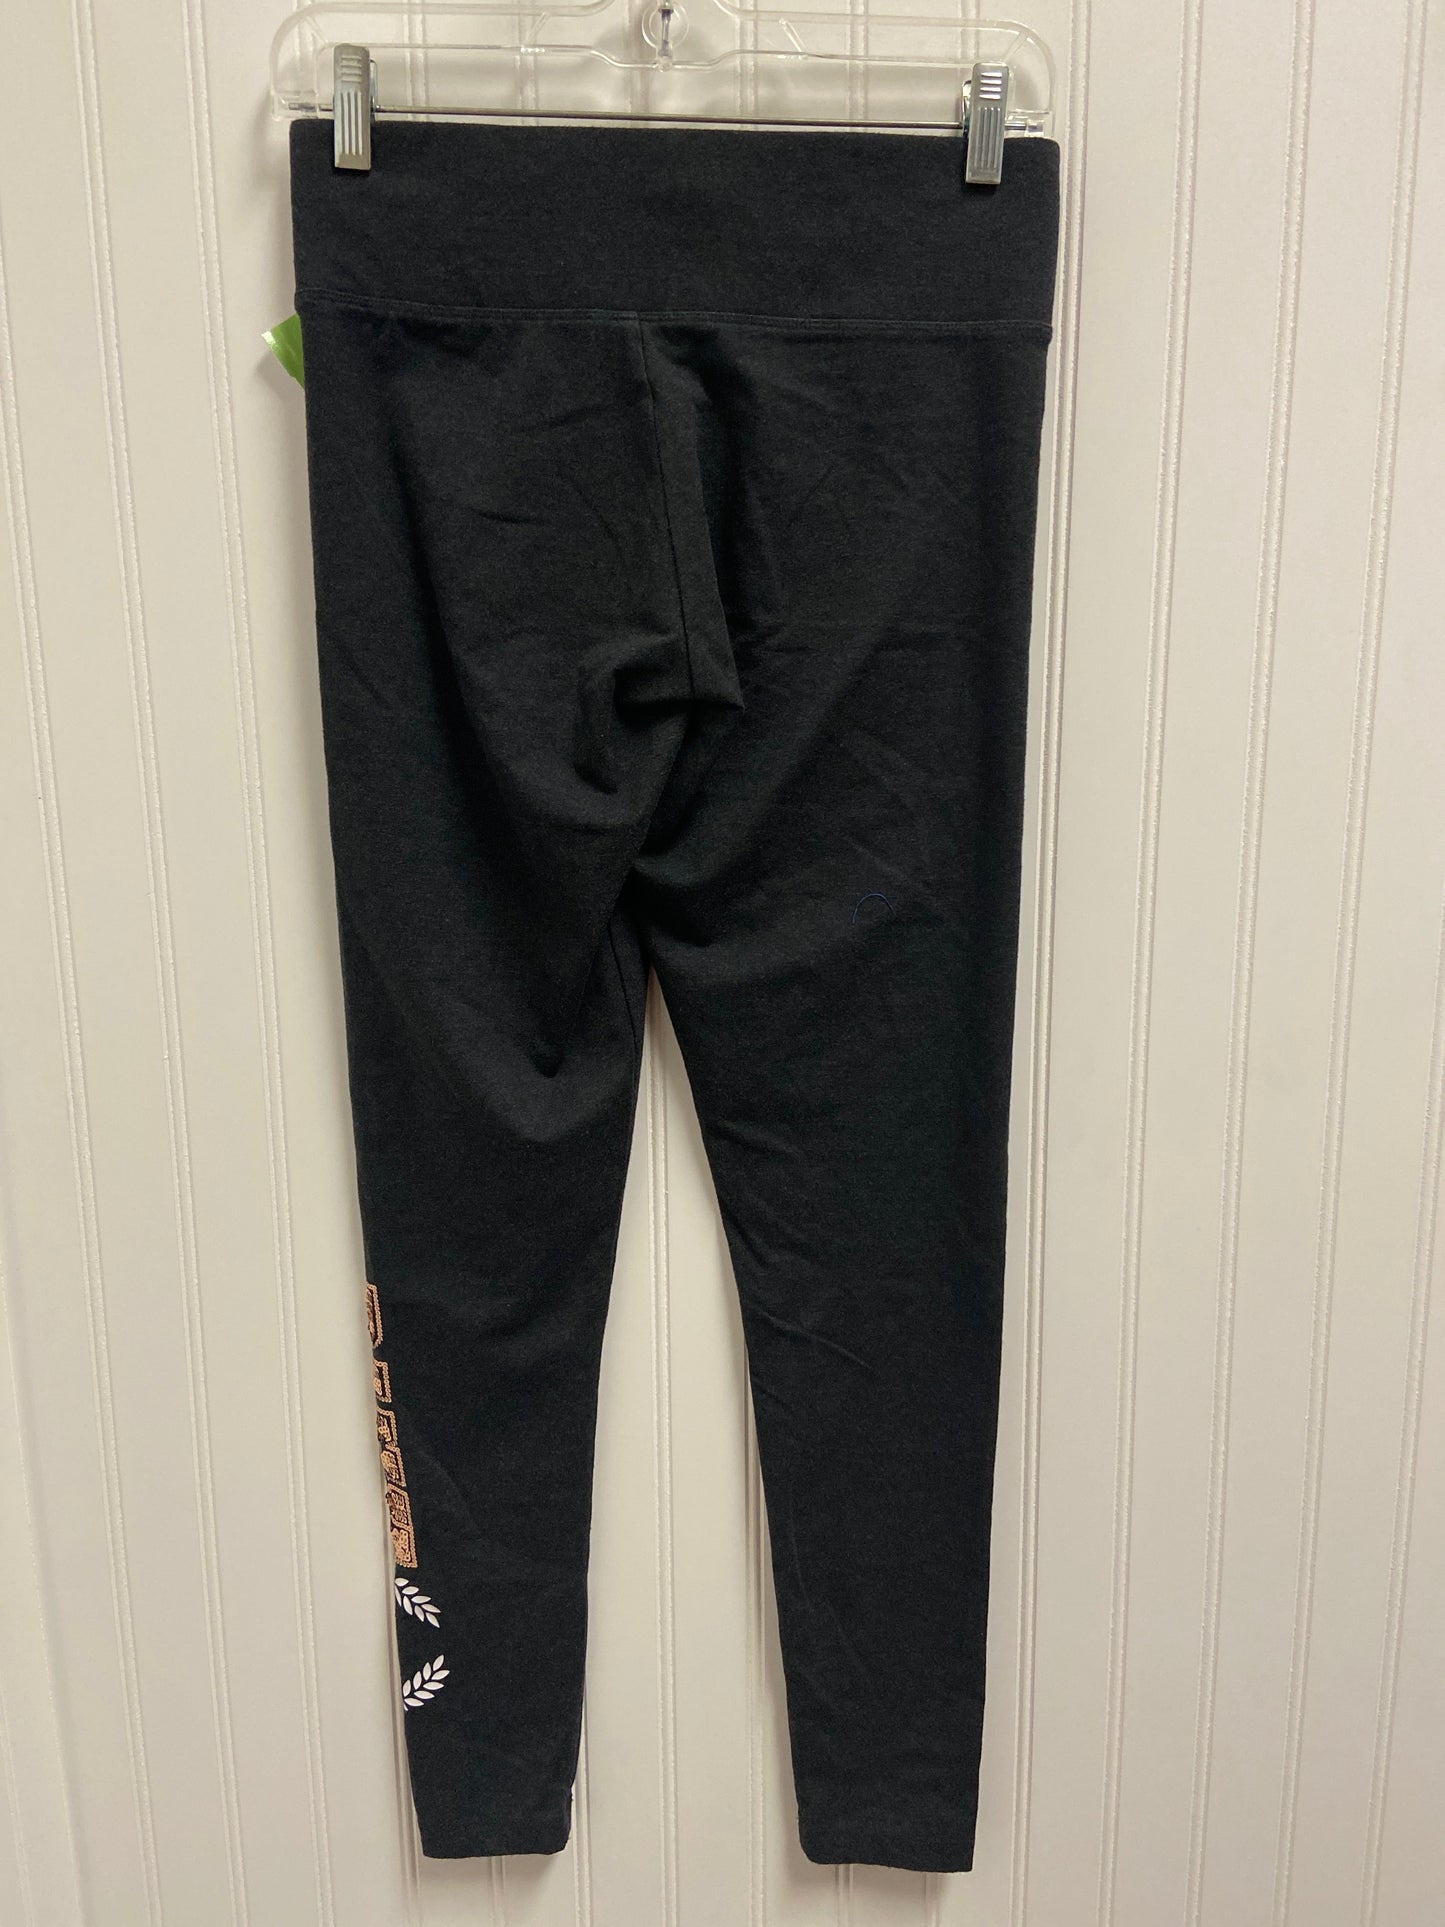 Athletic Leggings By Pink  Size: S